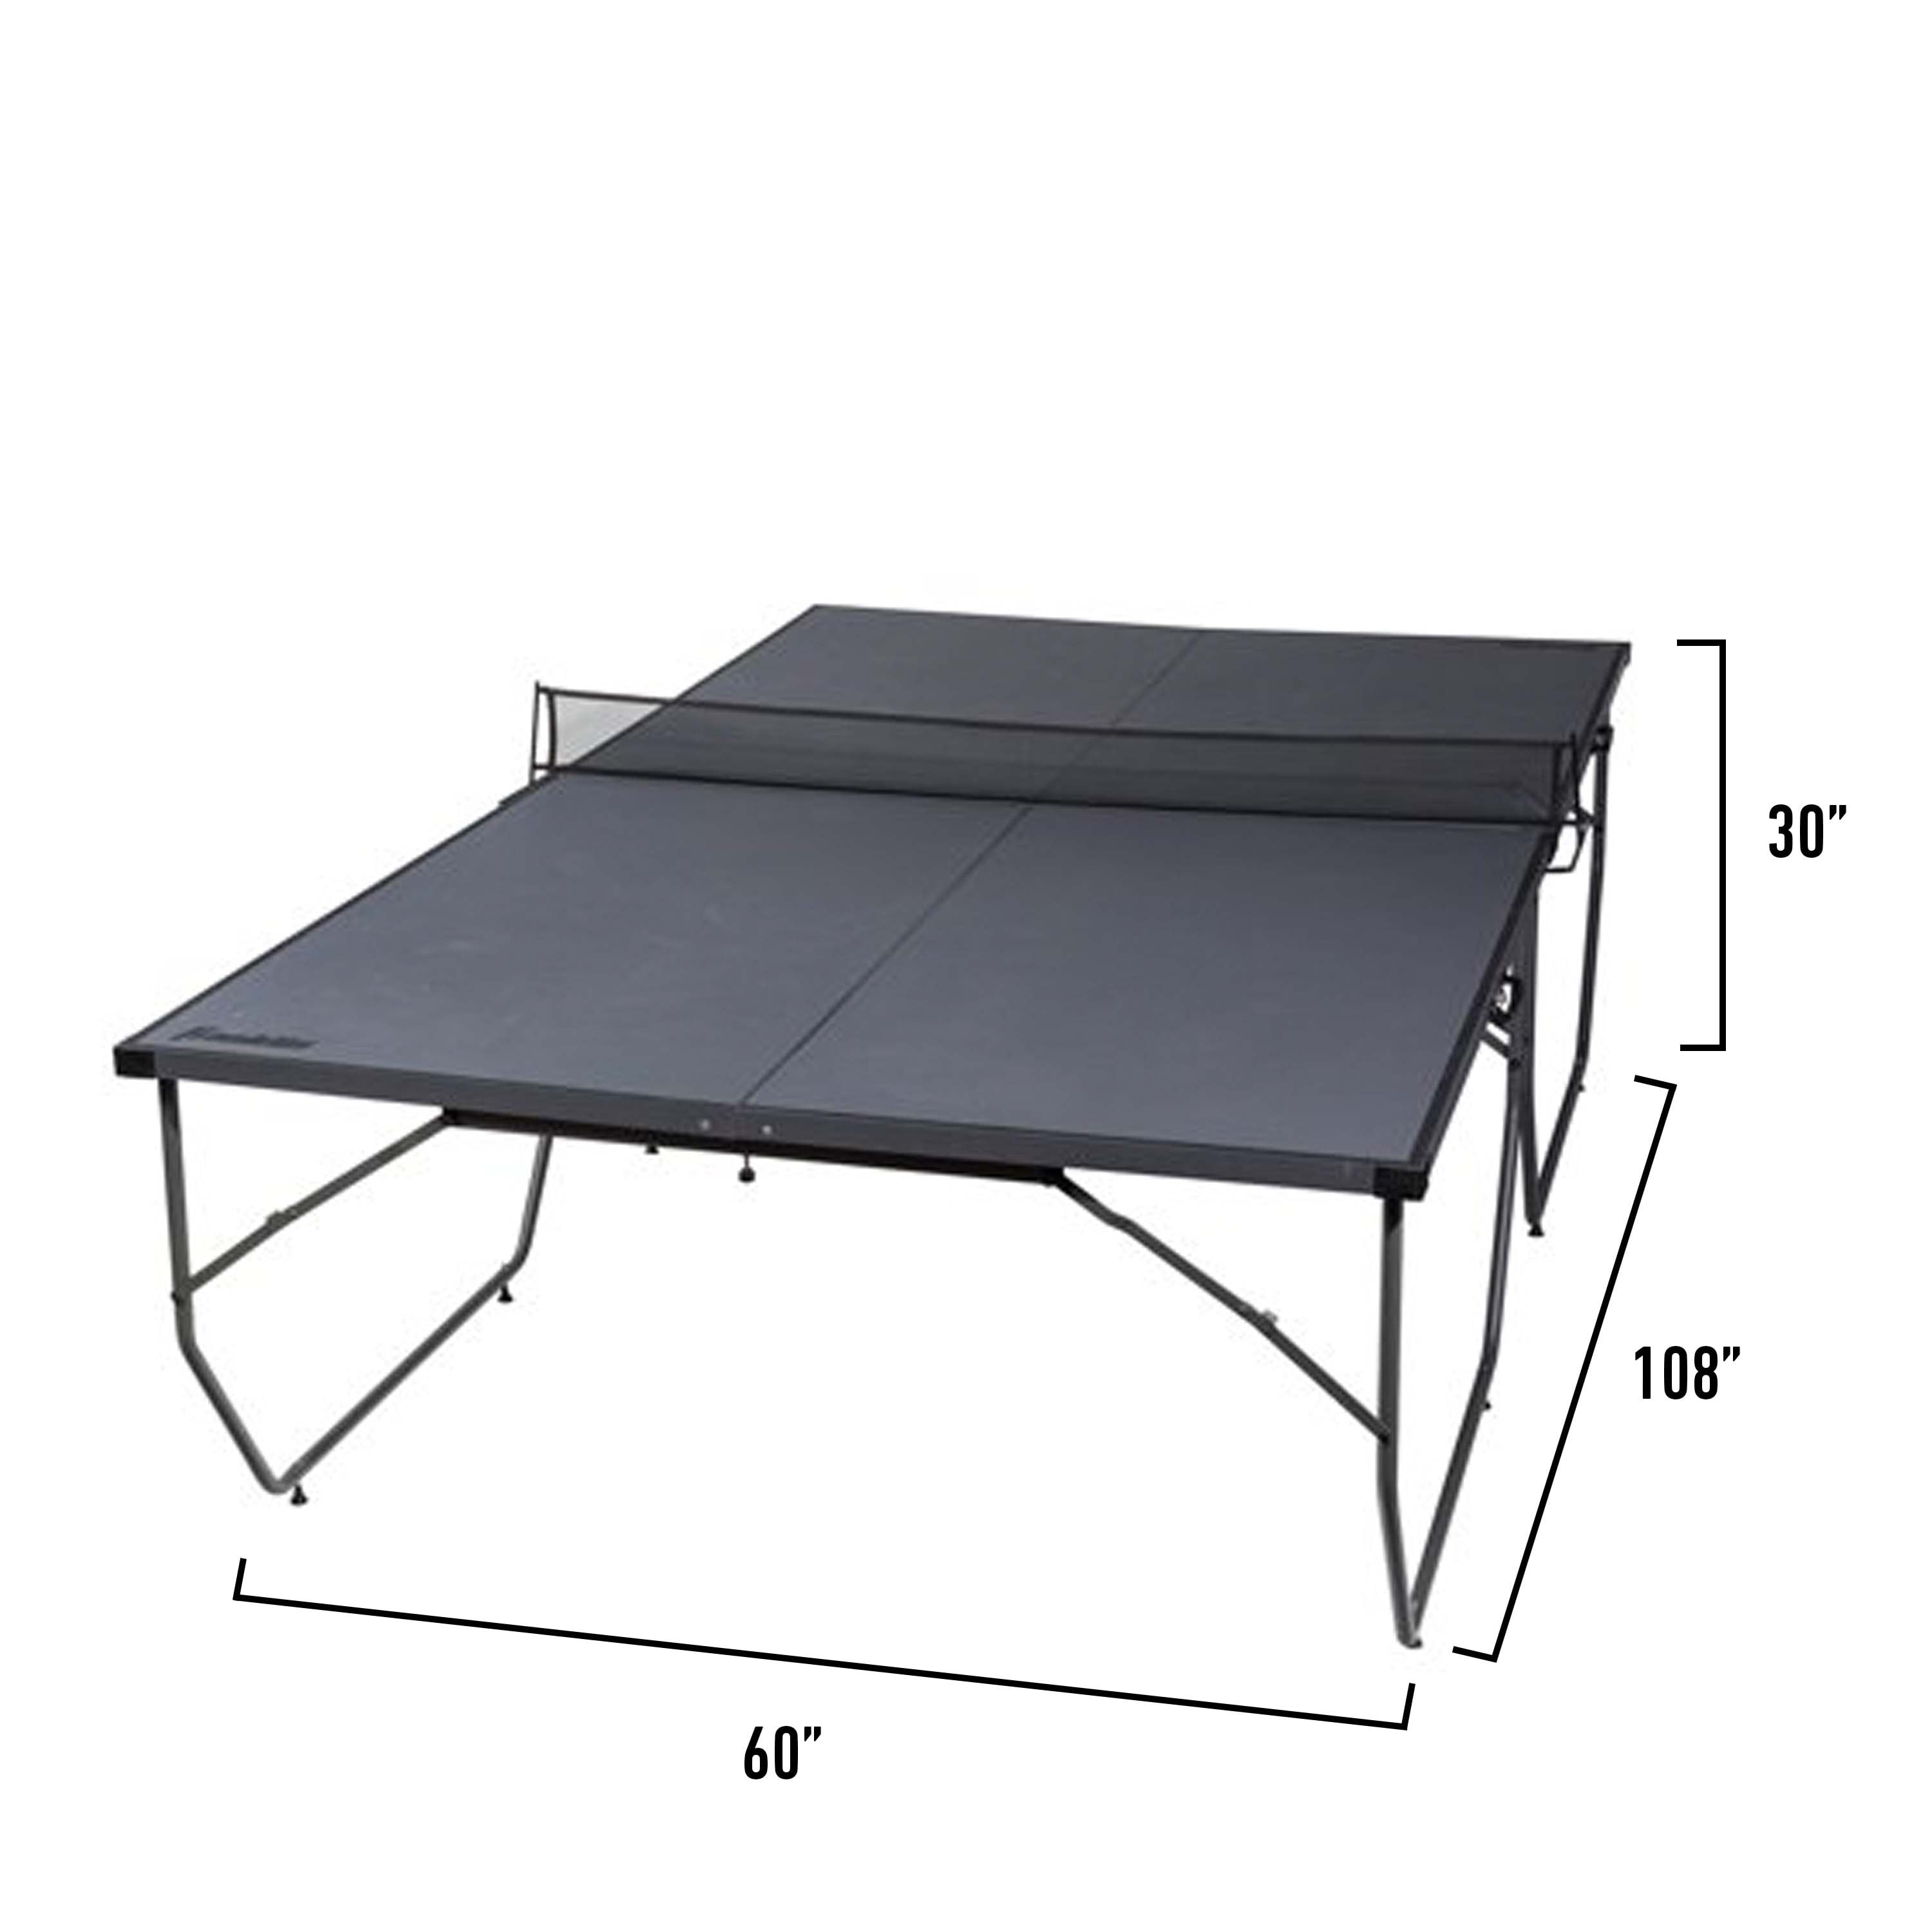 Space Saving Design Franklin Sports Mid Size Table Tennis Table Renewed Ideal for Smaller Spaces